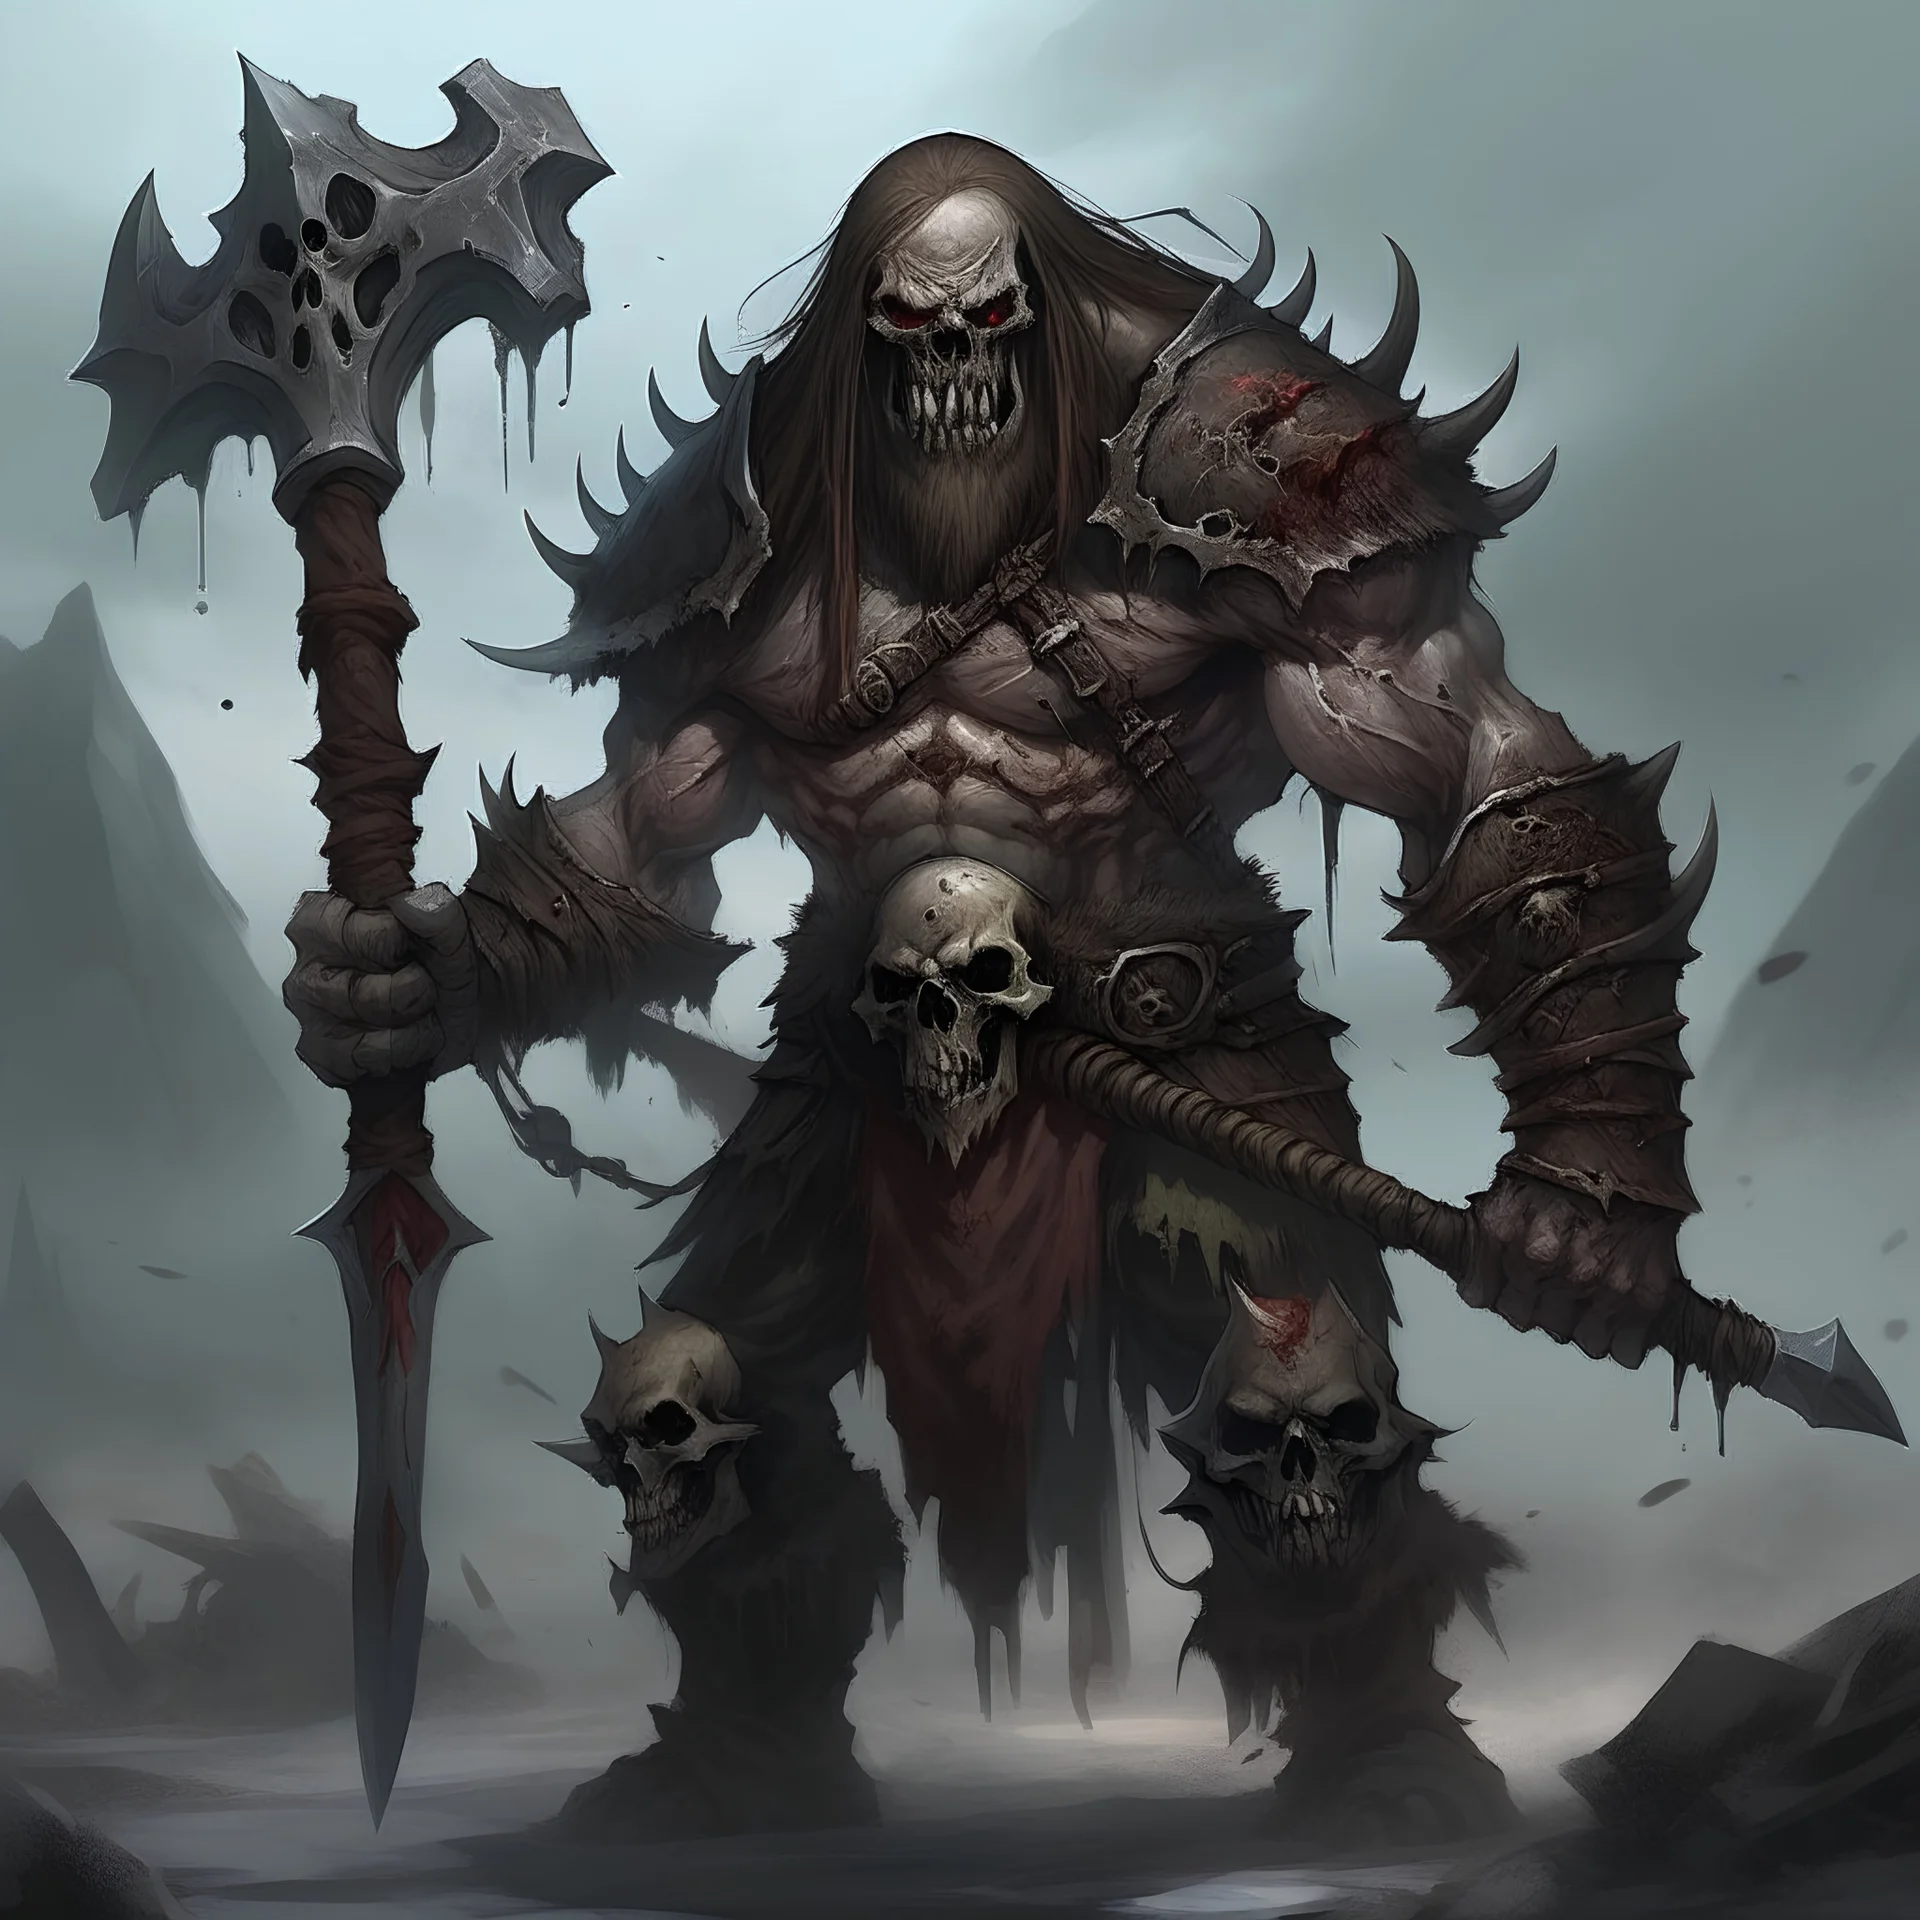 Undead berserker with an undying rage